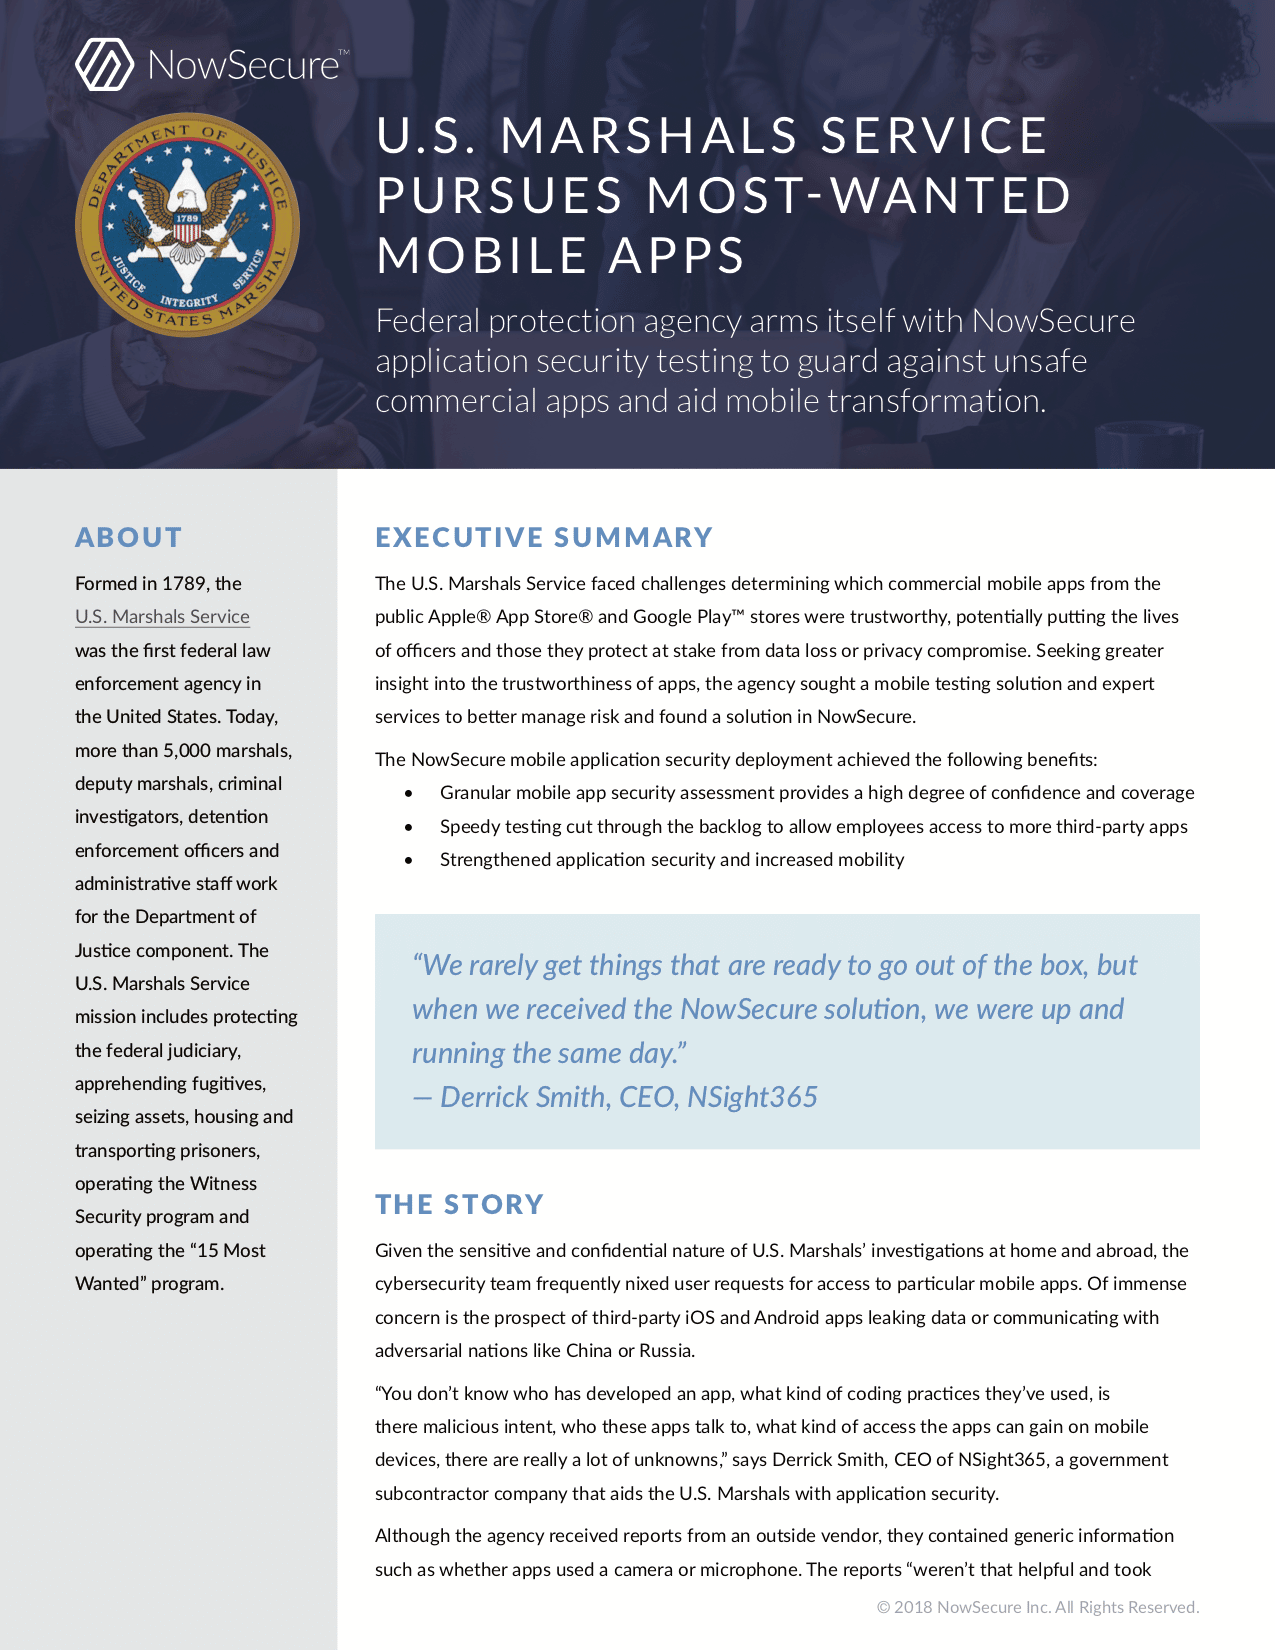 U.S. Marshals Service Pursues Most-Wanted Mobile Apps